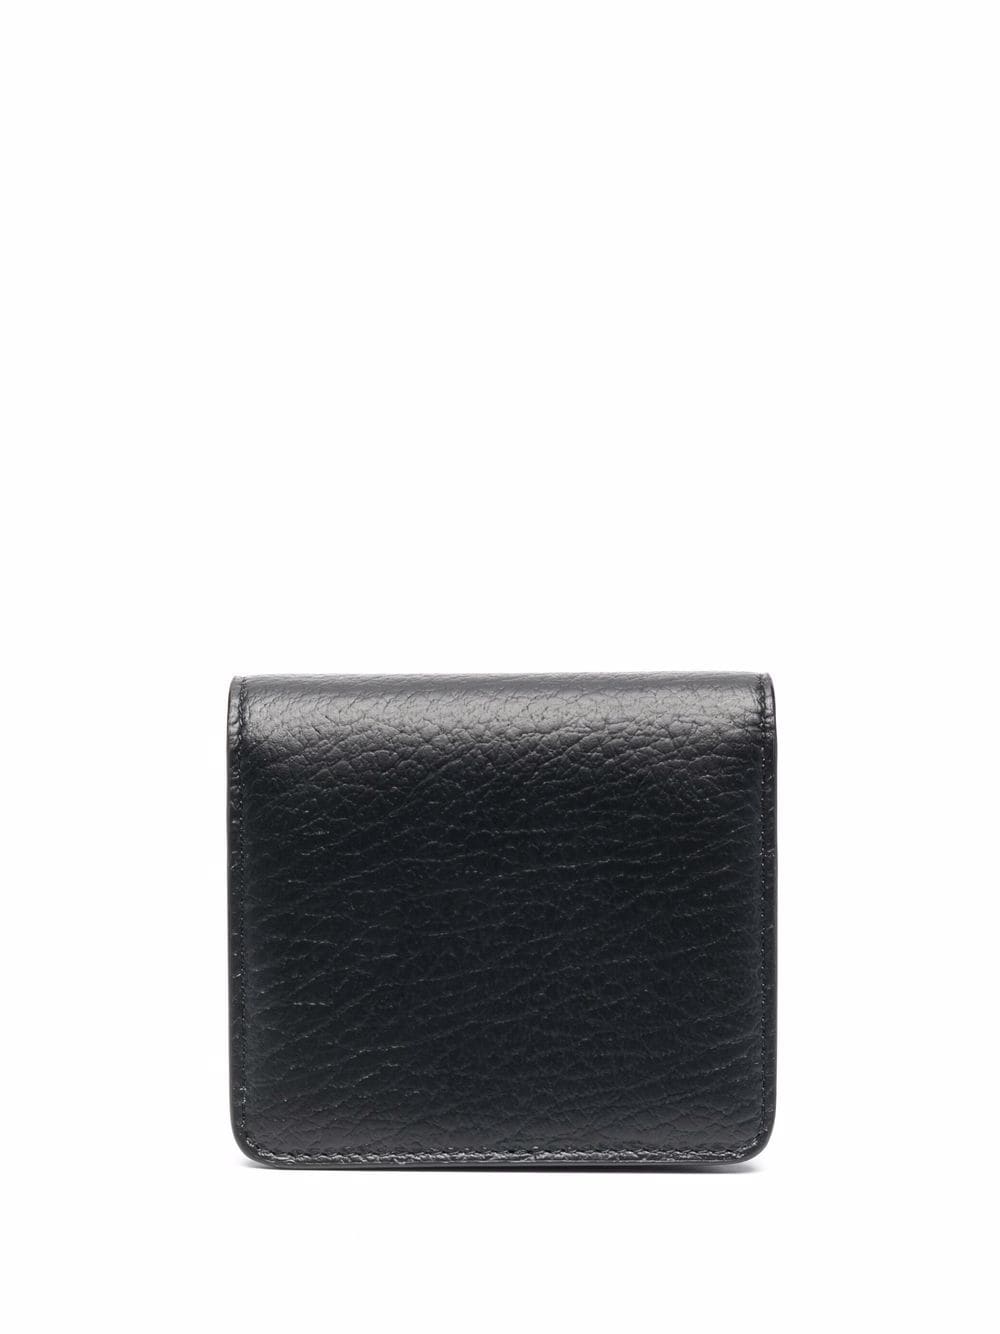 Black Four-Stitch Leather Chain Wallet